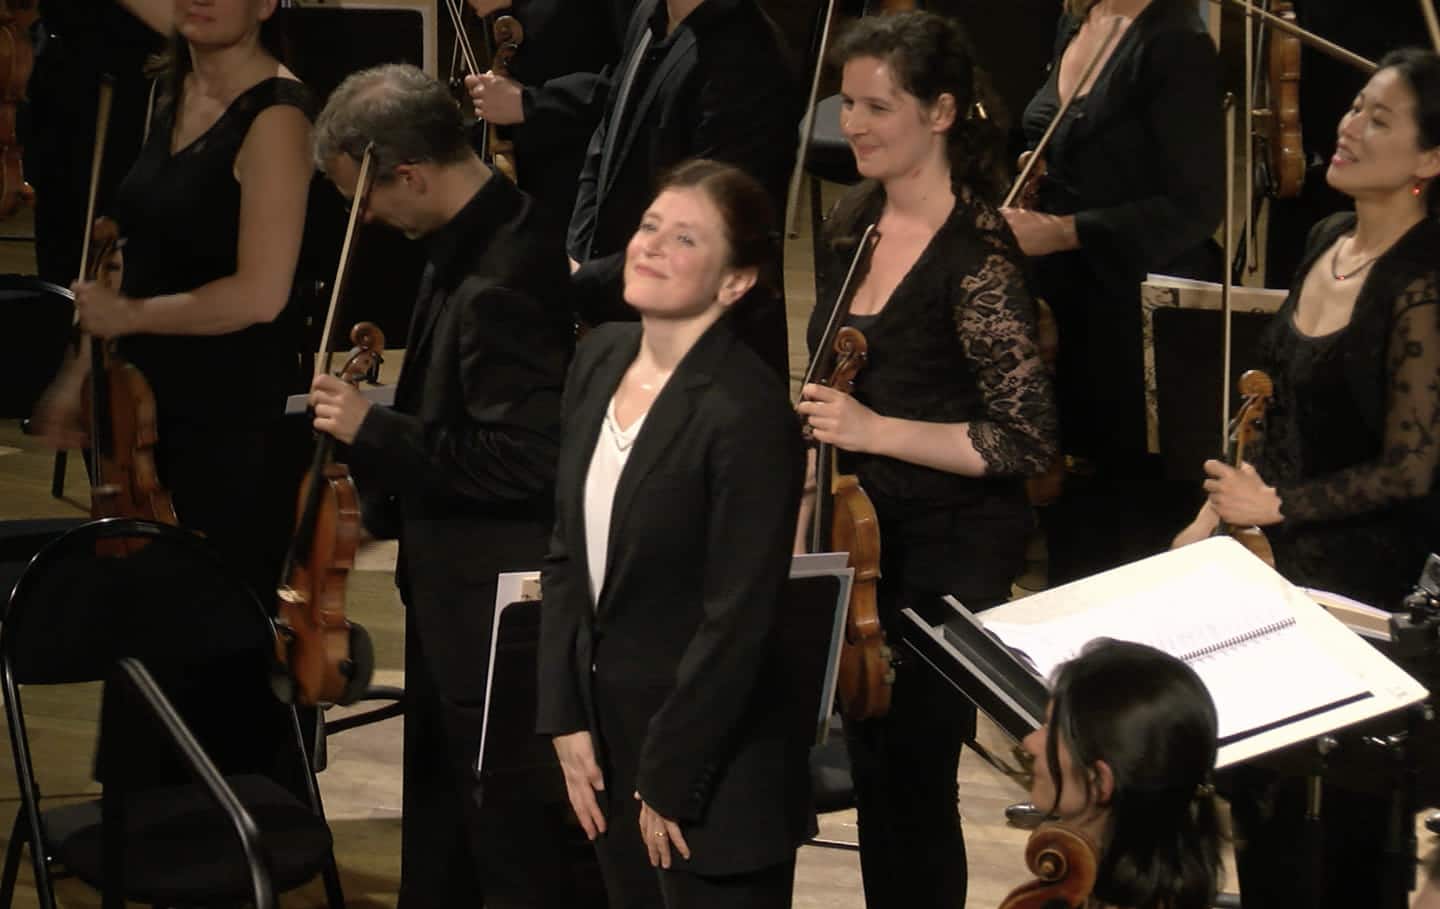 The first woman chief conductor in France?